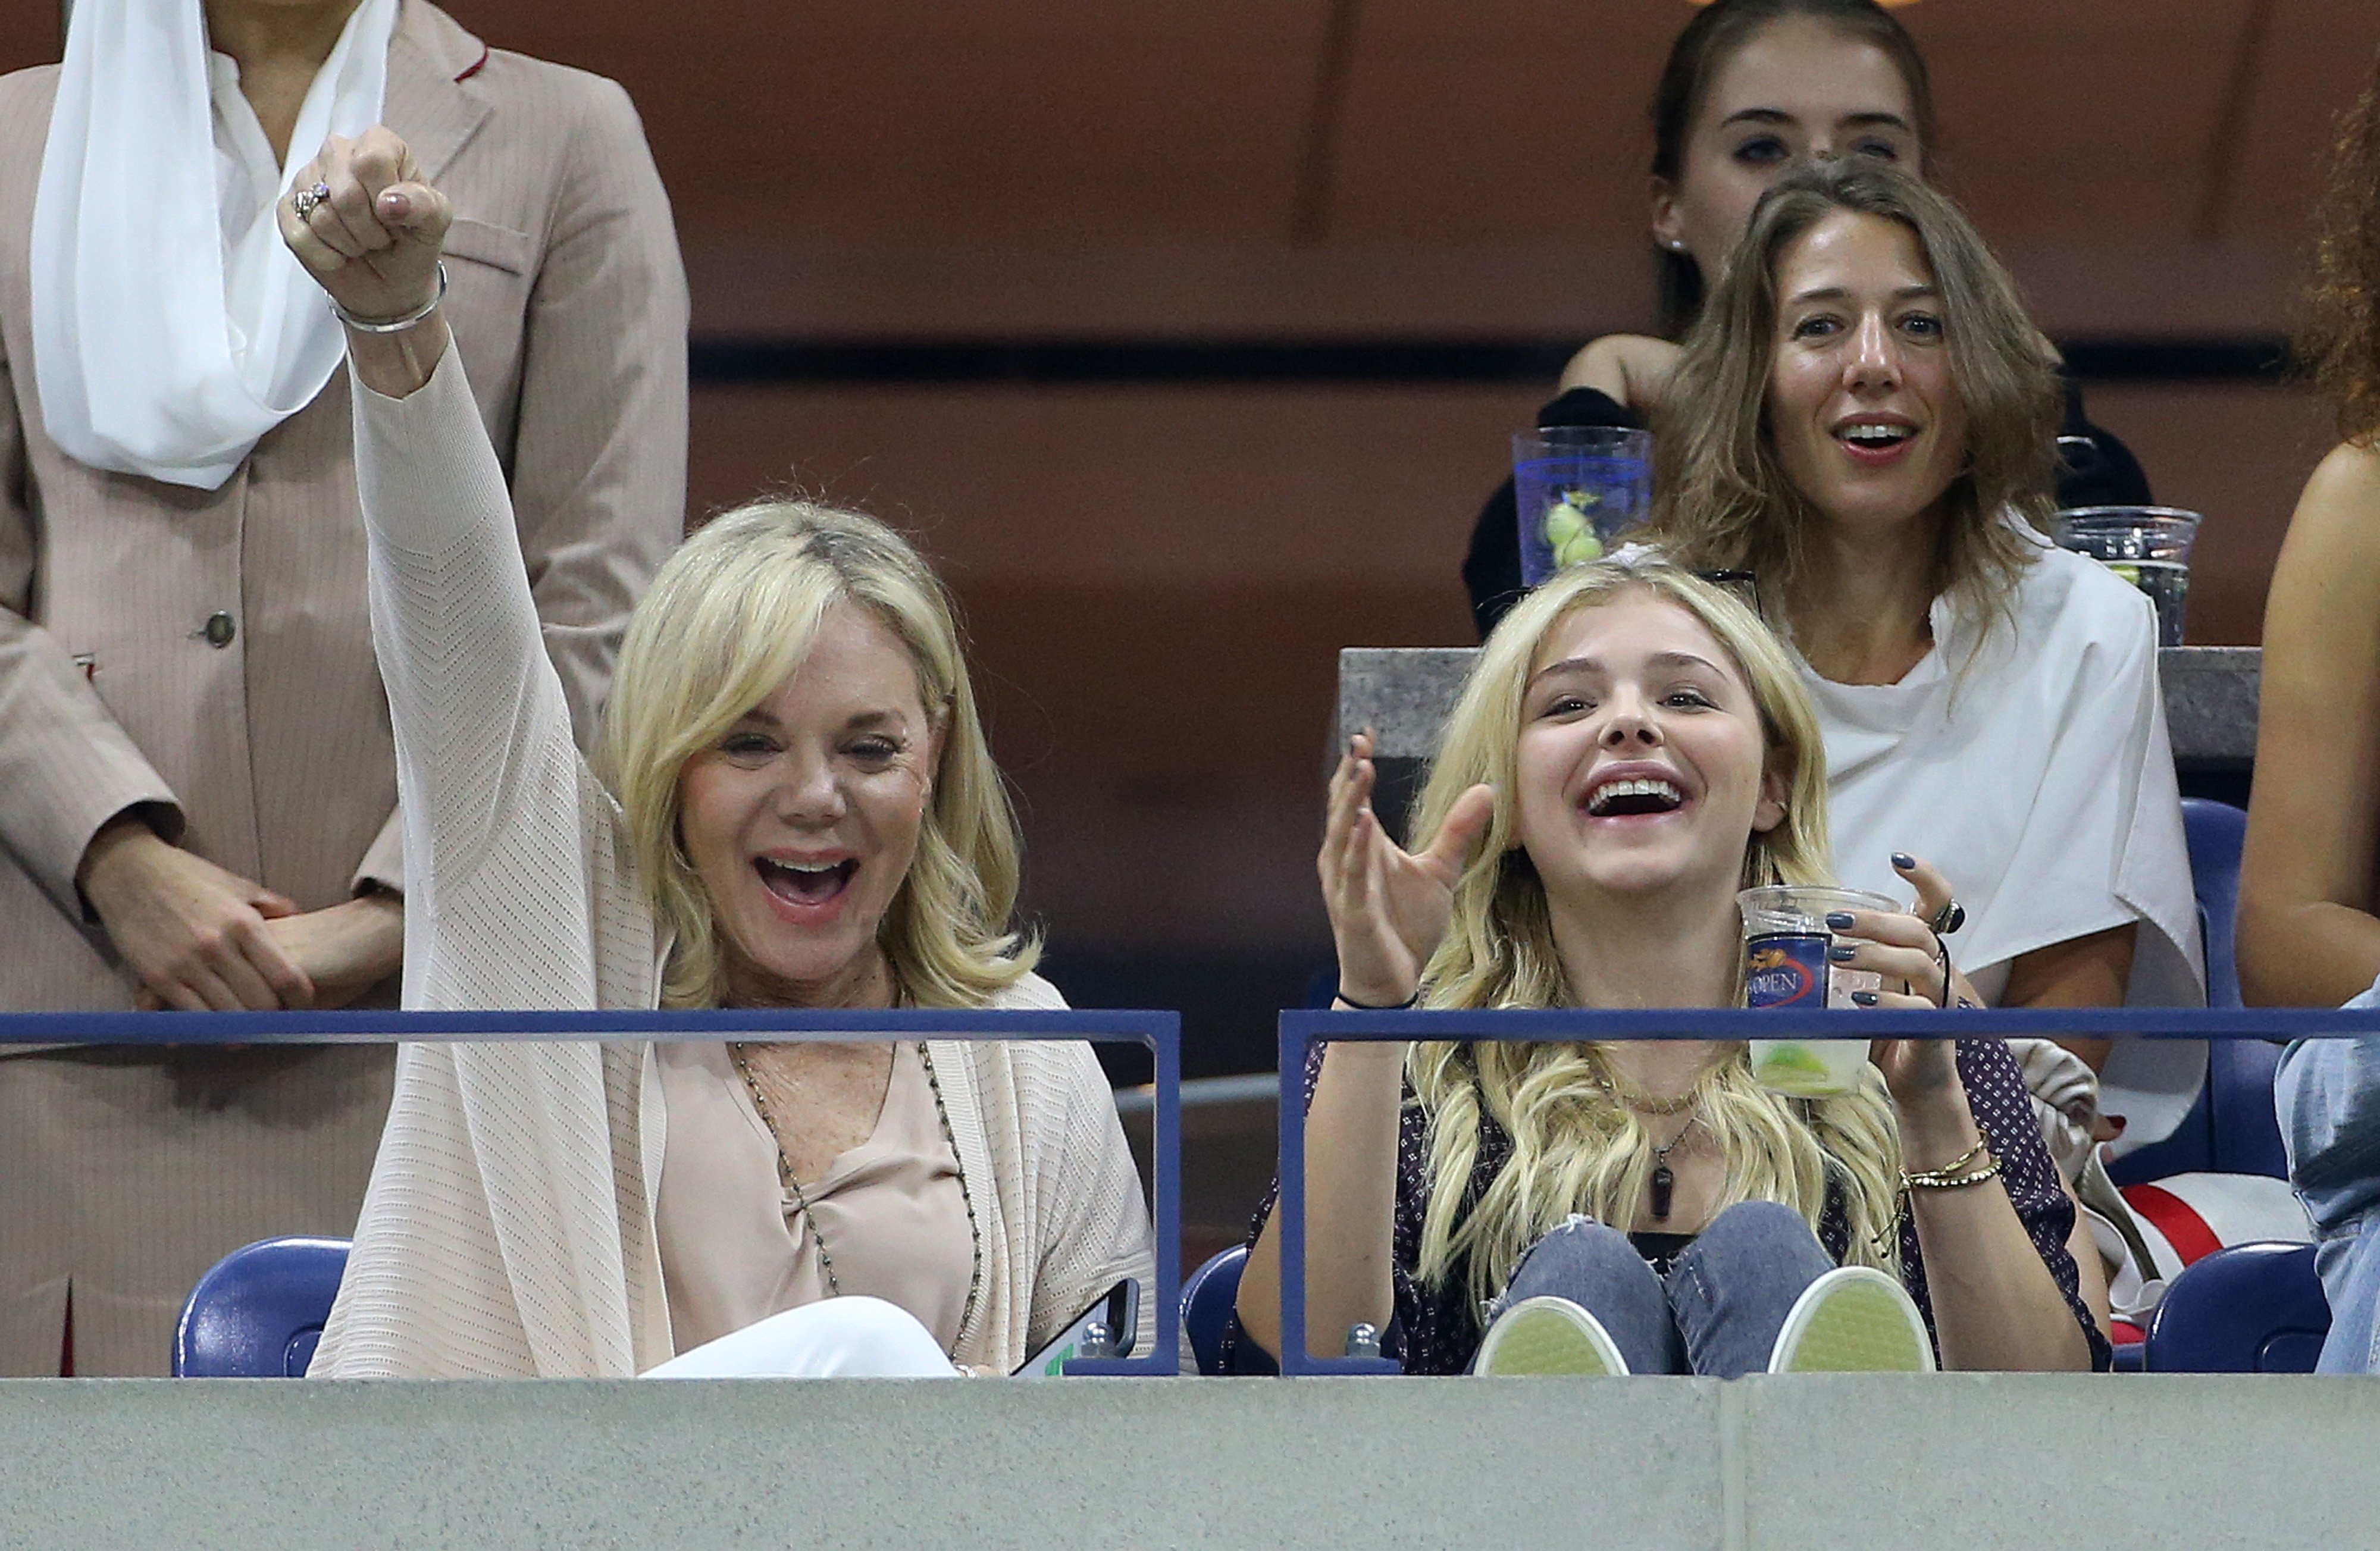 Chloe Grace Moretz and her mother Teri Duke Moretz at the US Open in New York City on September 5, 2015. | Source: Getty Images